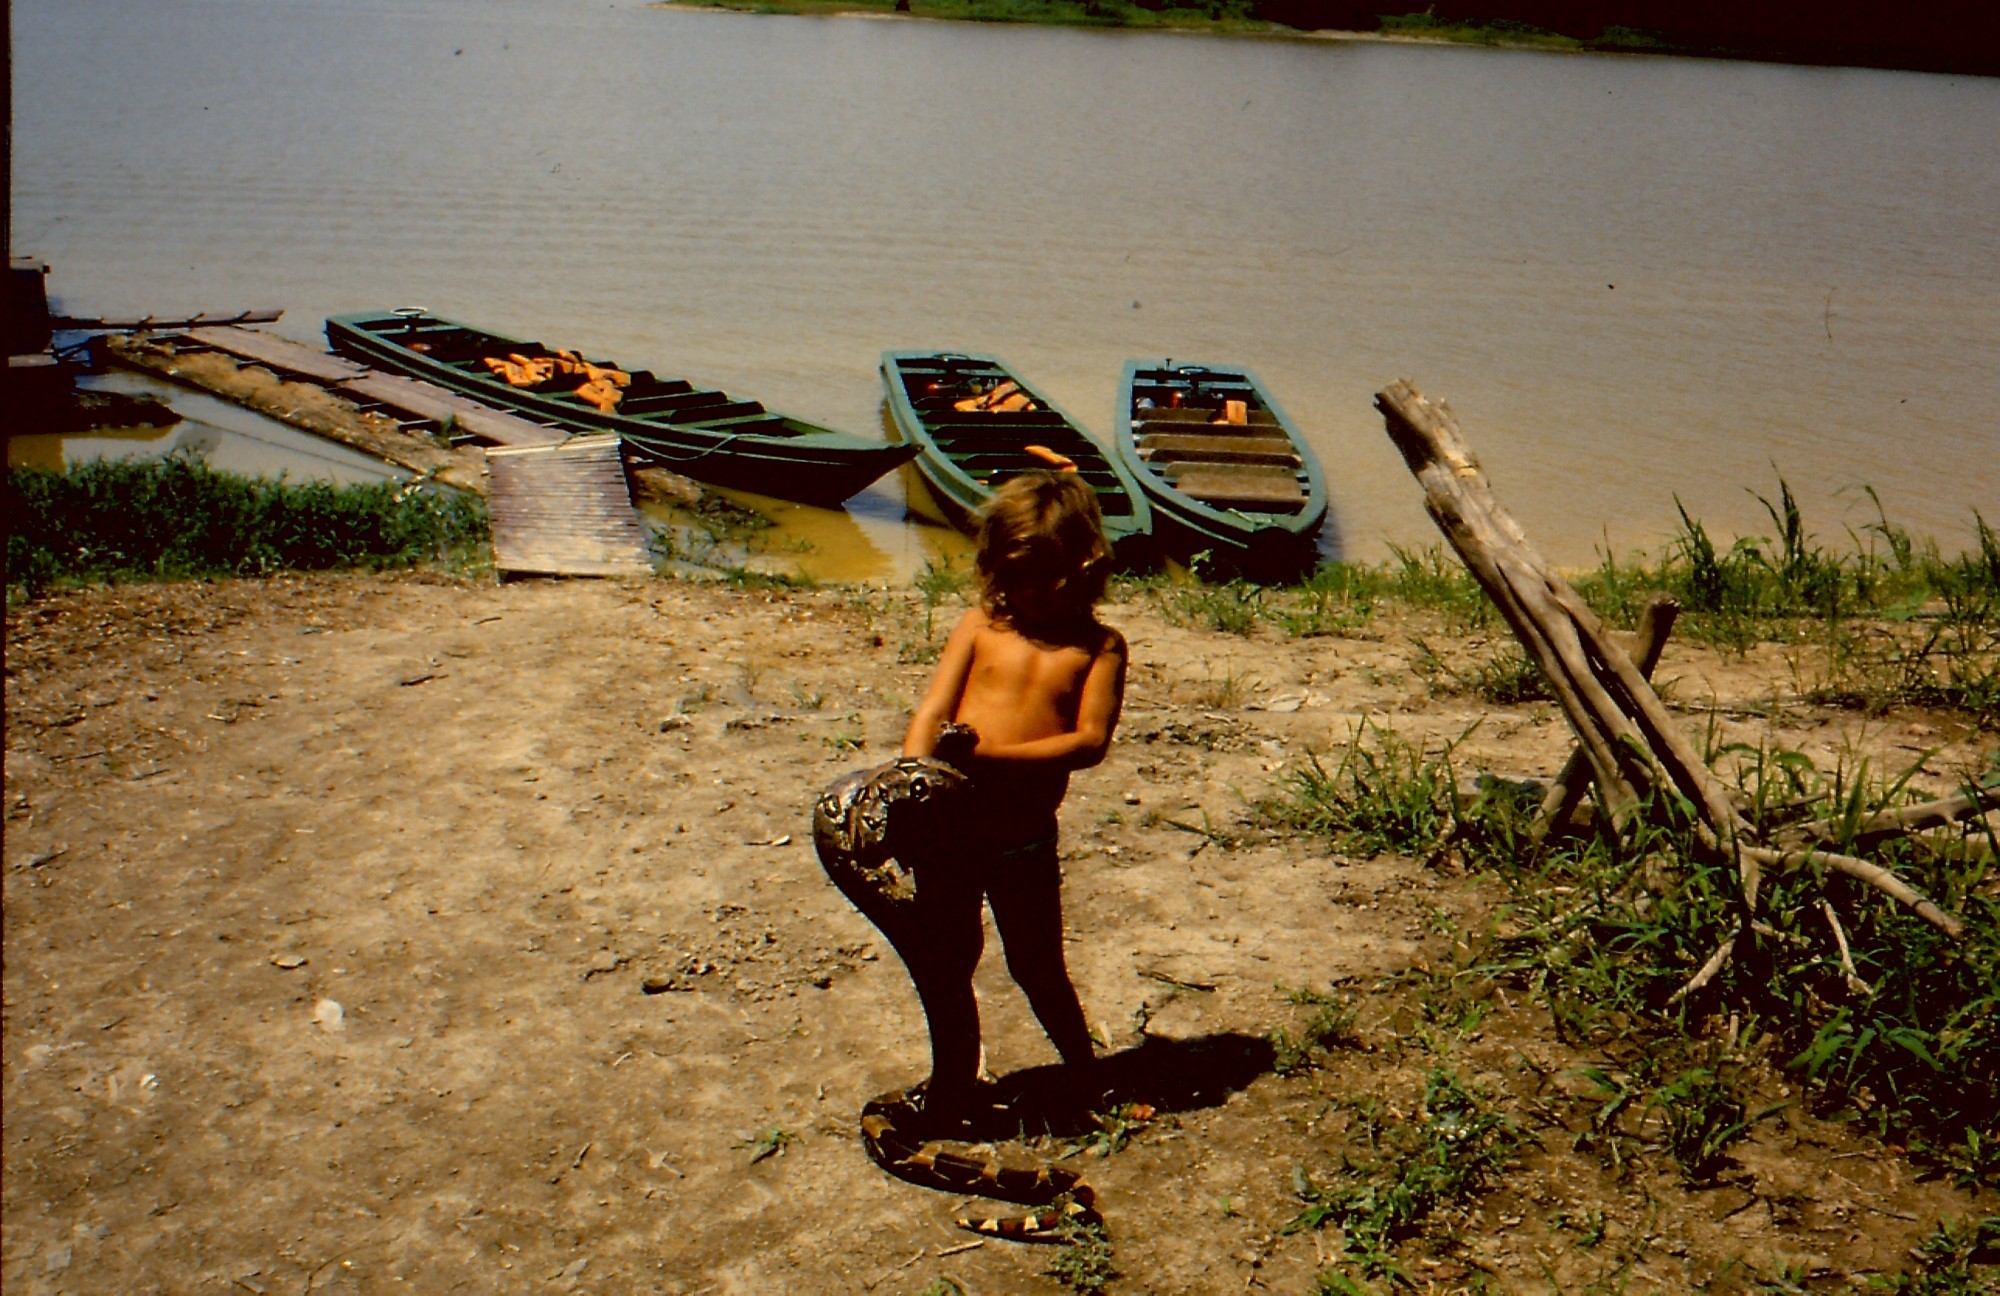 Amazonas. The baby and the snake.